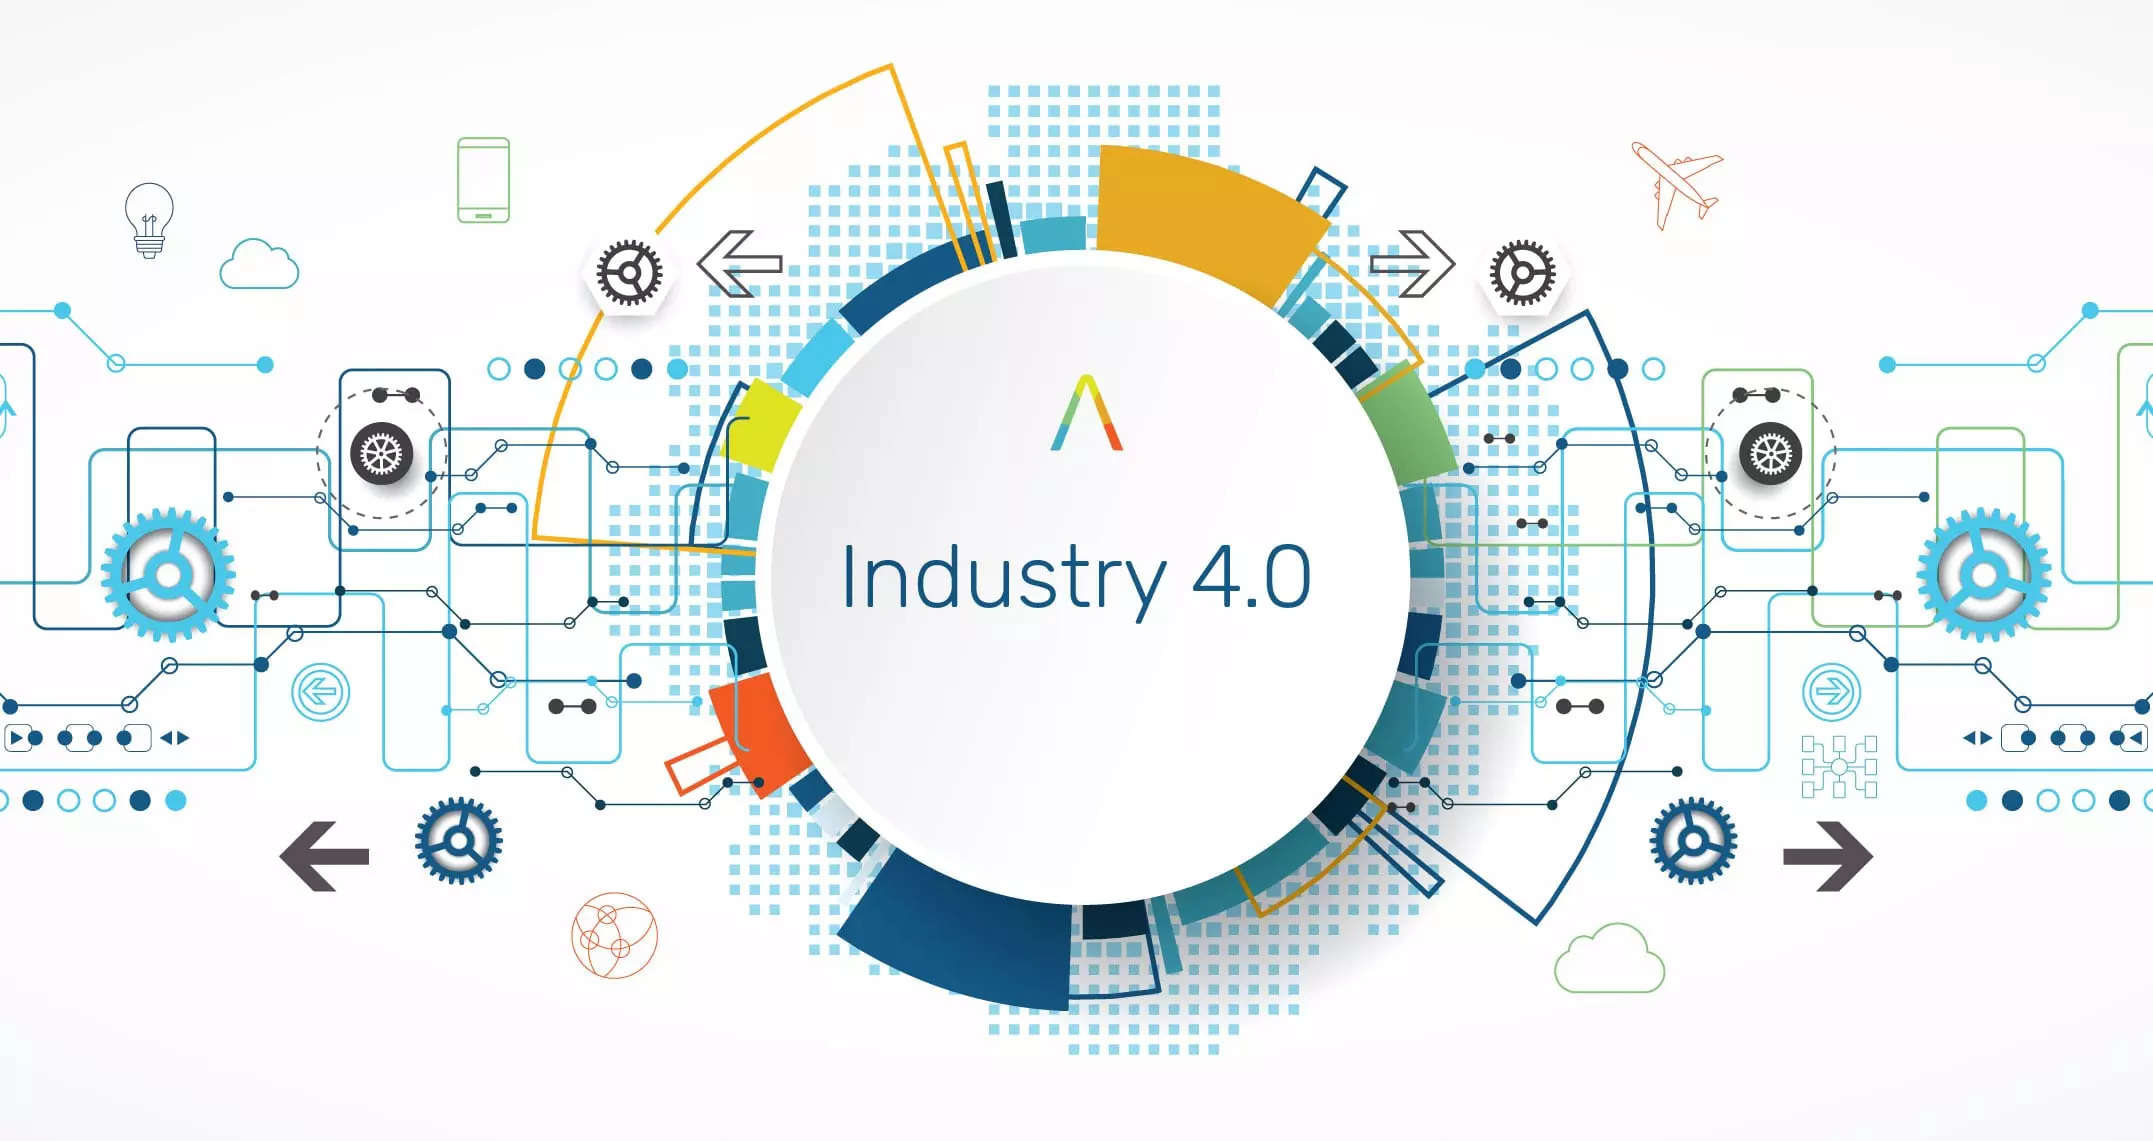 Industry 4.0 to bring year of opportunities